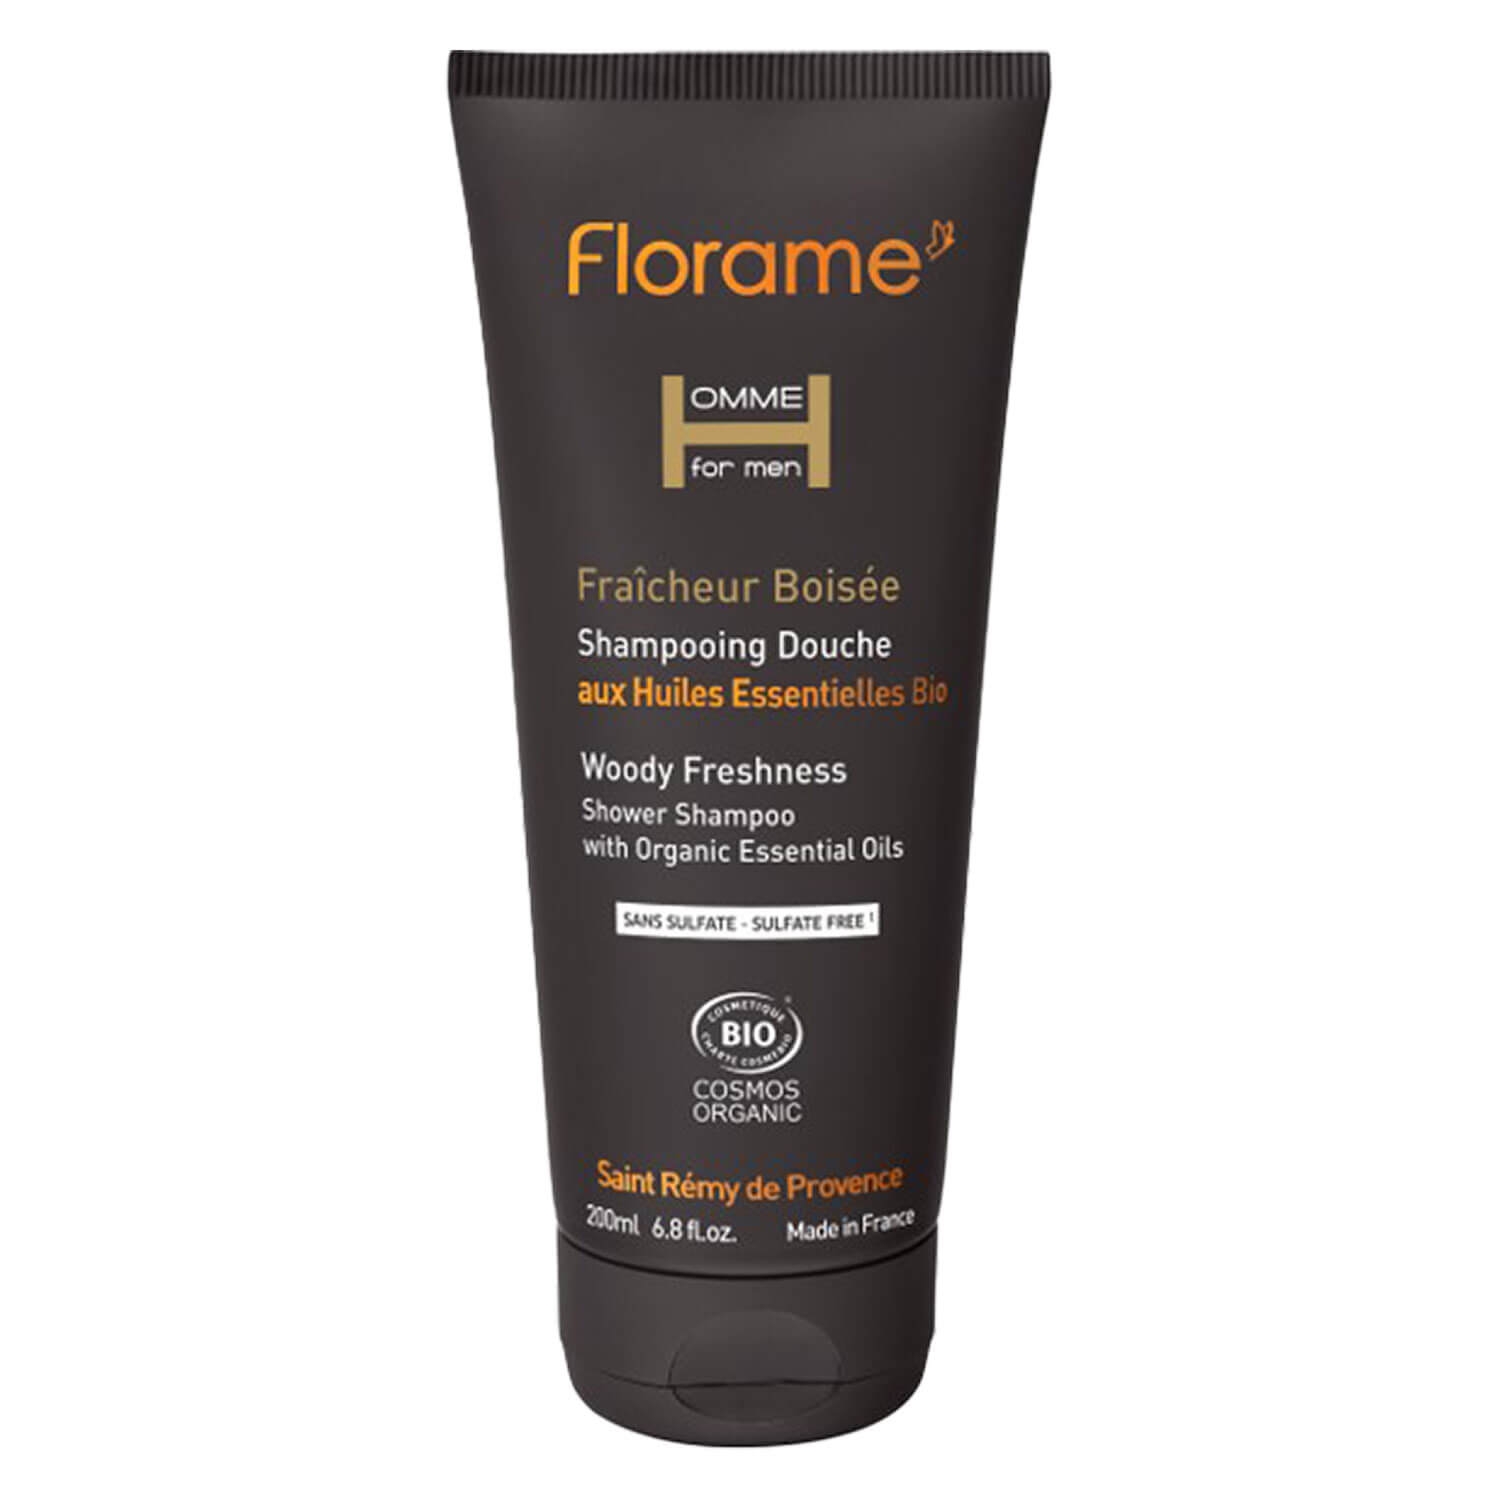 Product image from Florame Homme - Woody Freshness Shower Shampoo